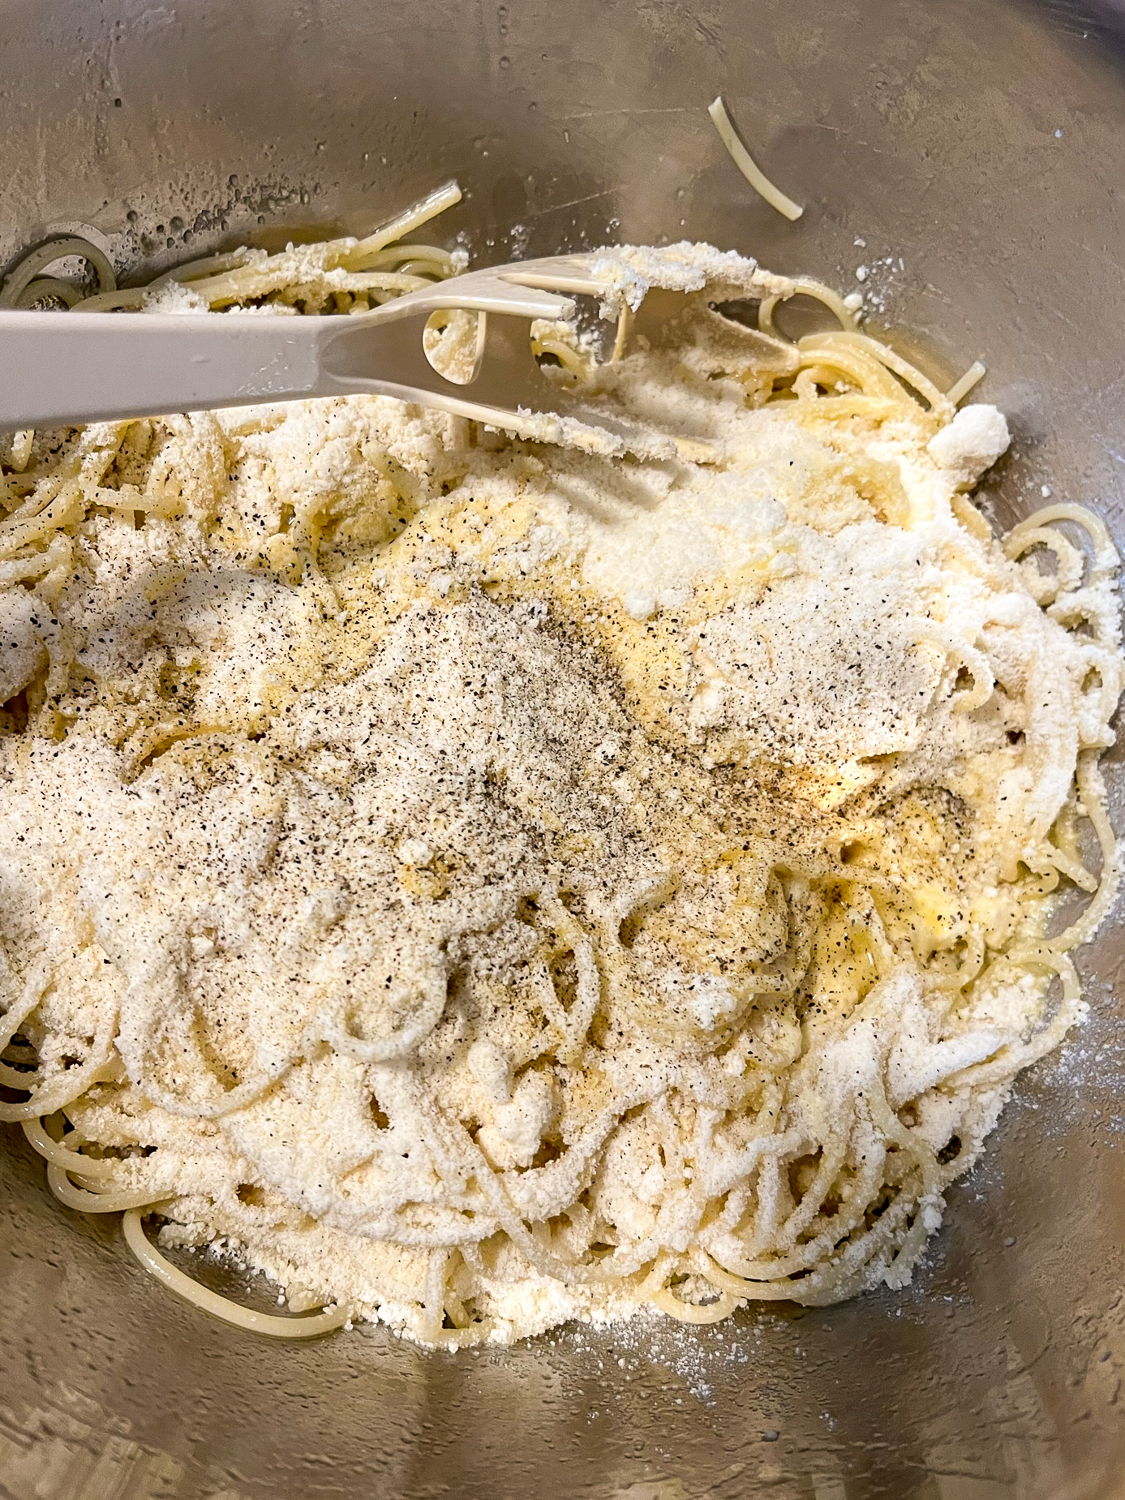 Olive oil, eggs, black pepper, and parmesan cheese being mixed into the spaghetti.